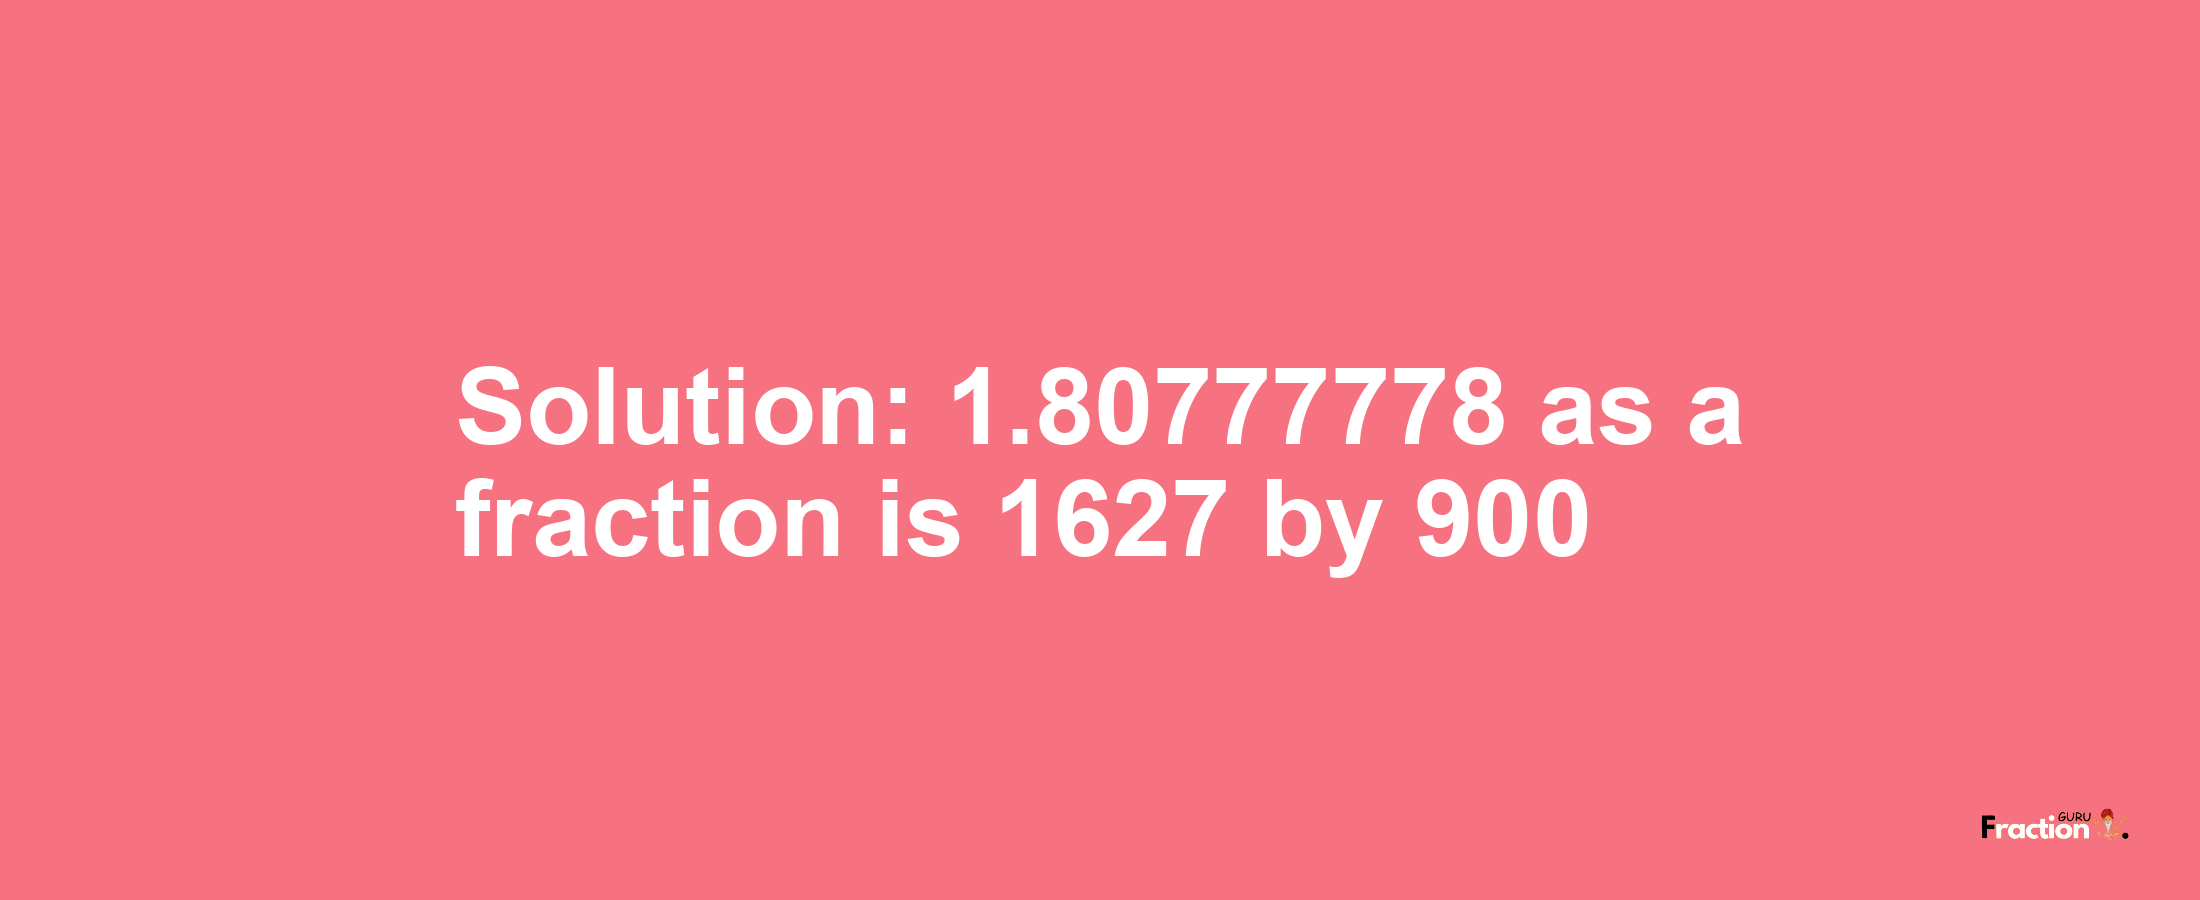 Solution:1.80777778 as a fraction is 1627/900